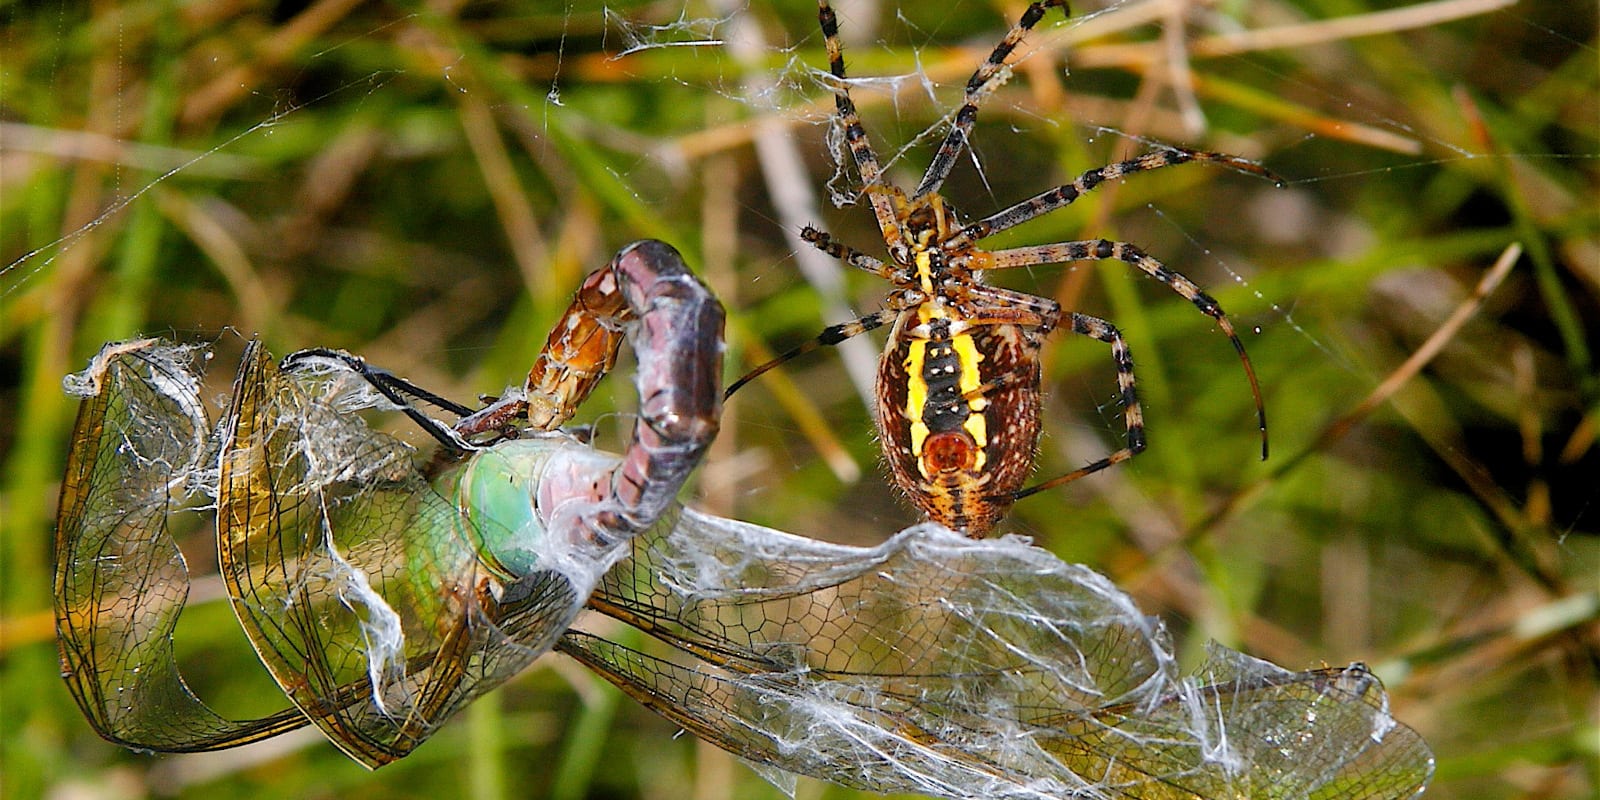 Banded Garden Spider Feasts on a Green Darner Dragonfly